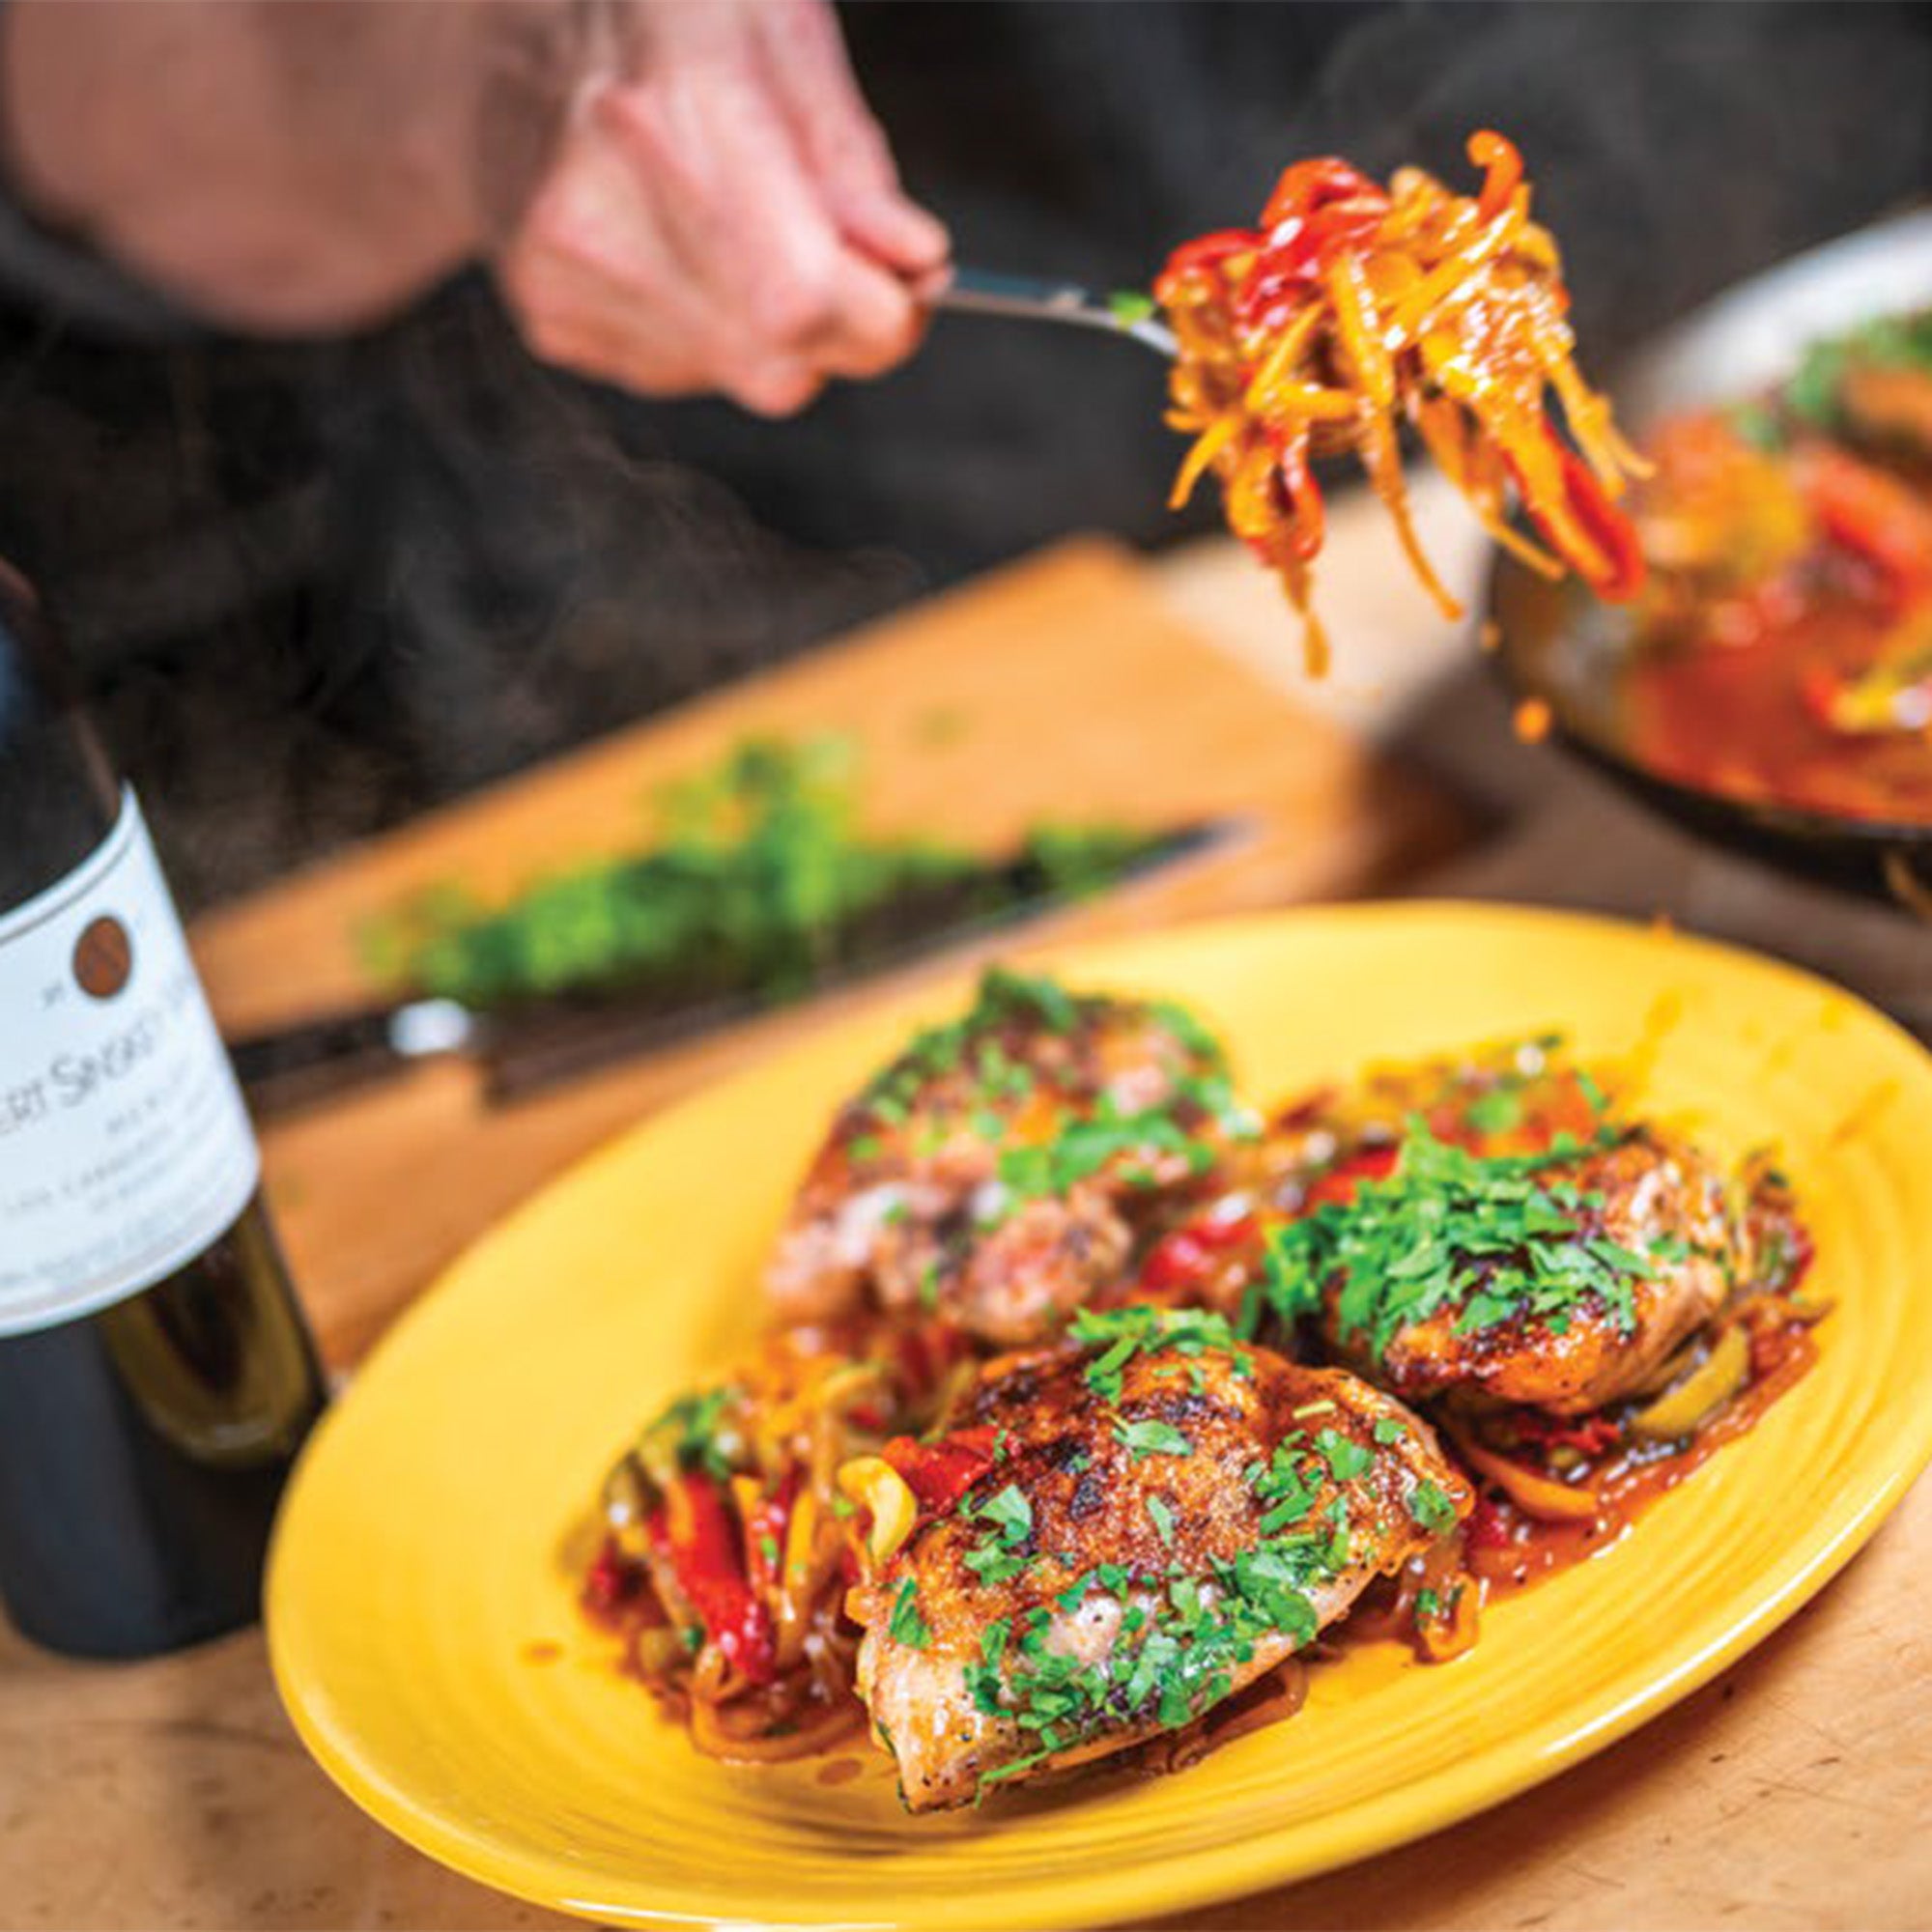 Roasted Chicken Thighs with Piquillo Pepper - recipe and photo by Robert Sinskey Vineyards